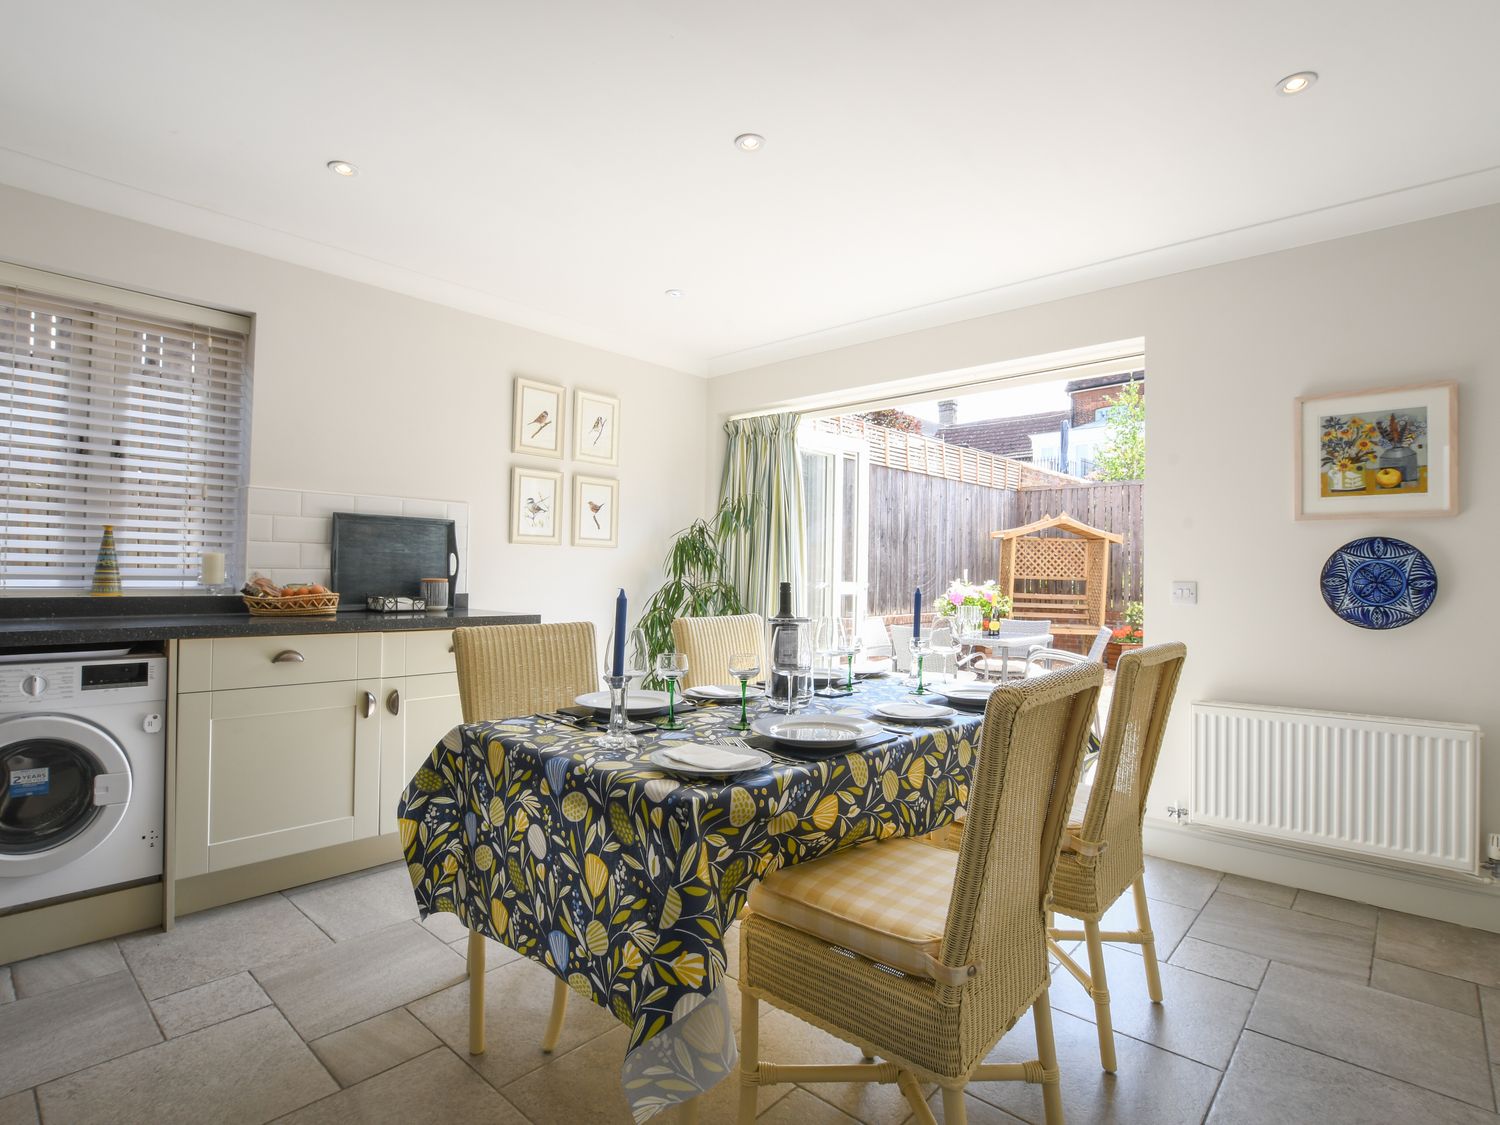 1 Coconut Cottage, Long Melford - Suffolk & Essex - 1117133 - photo 1